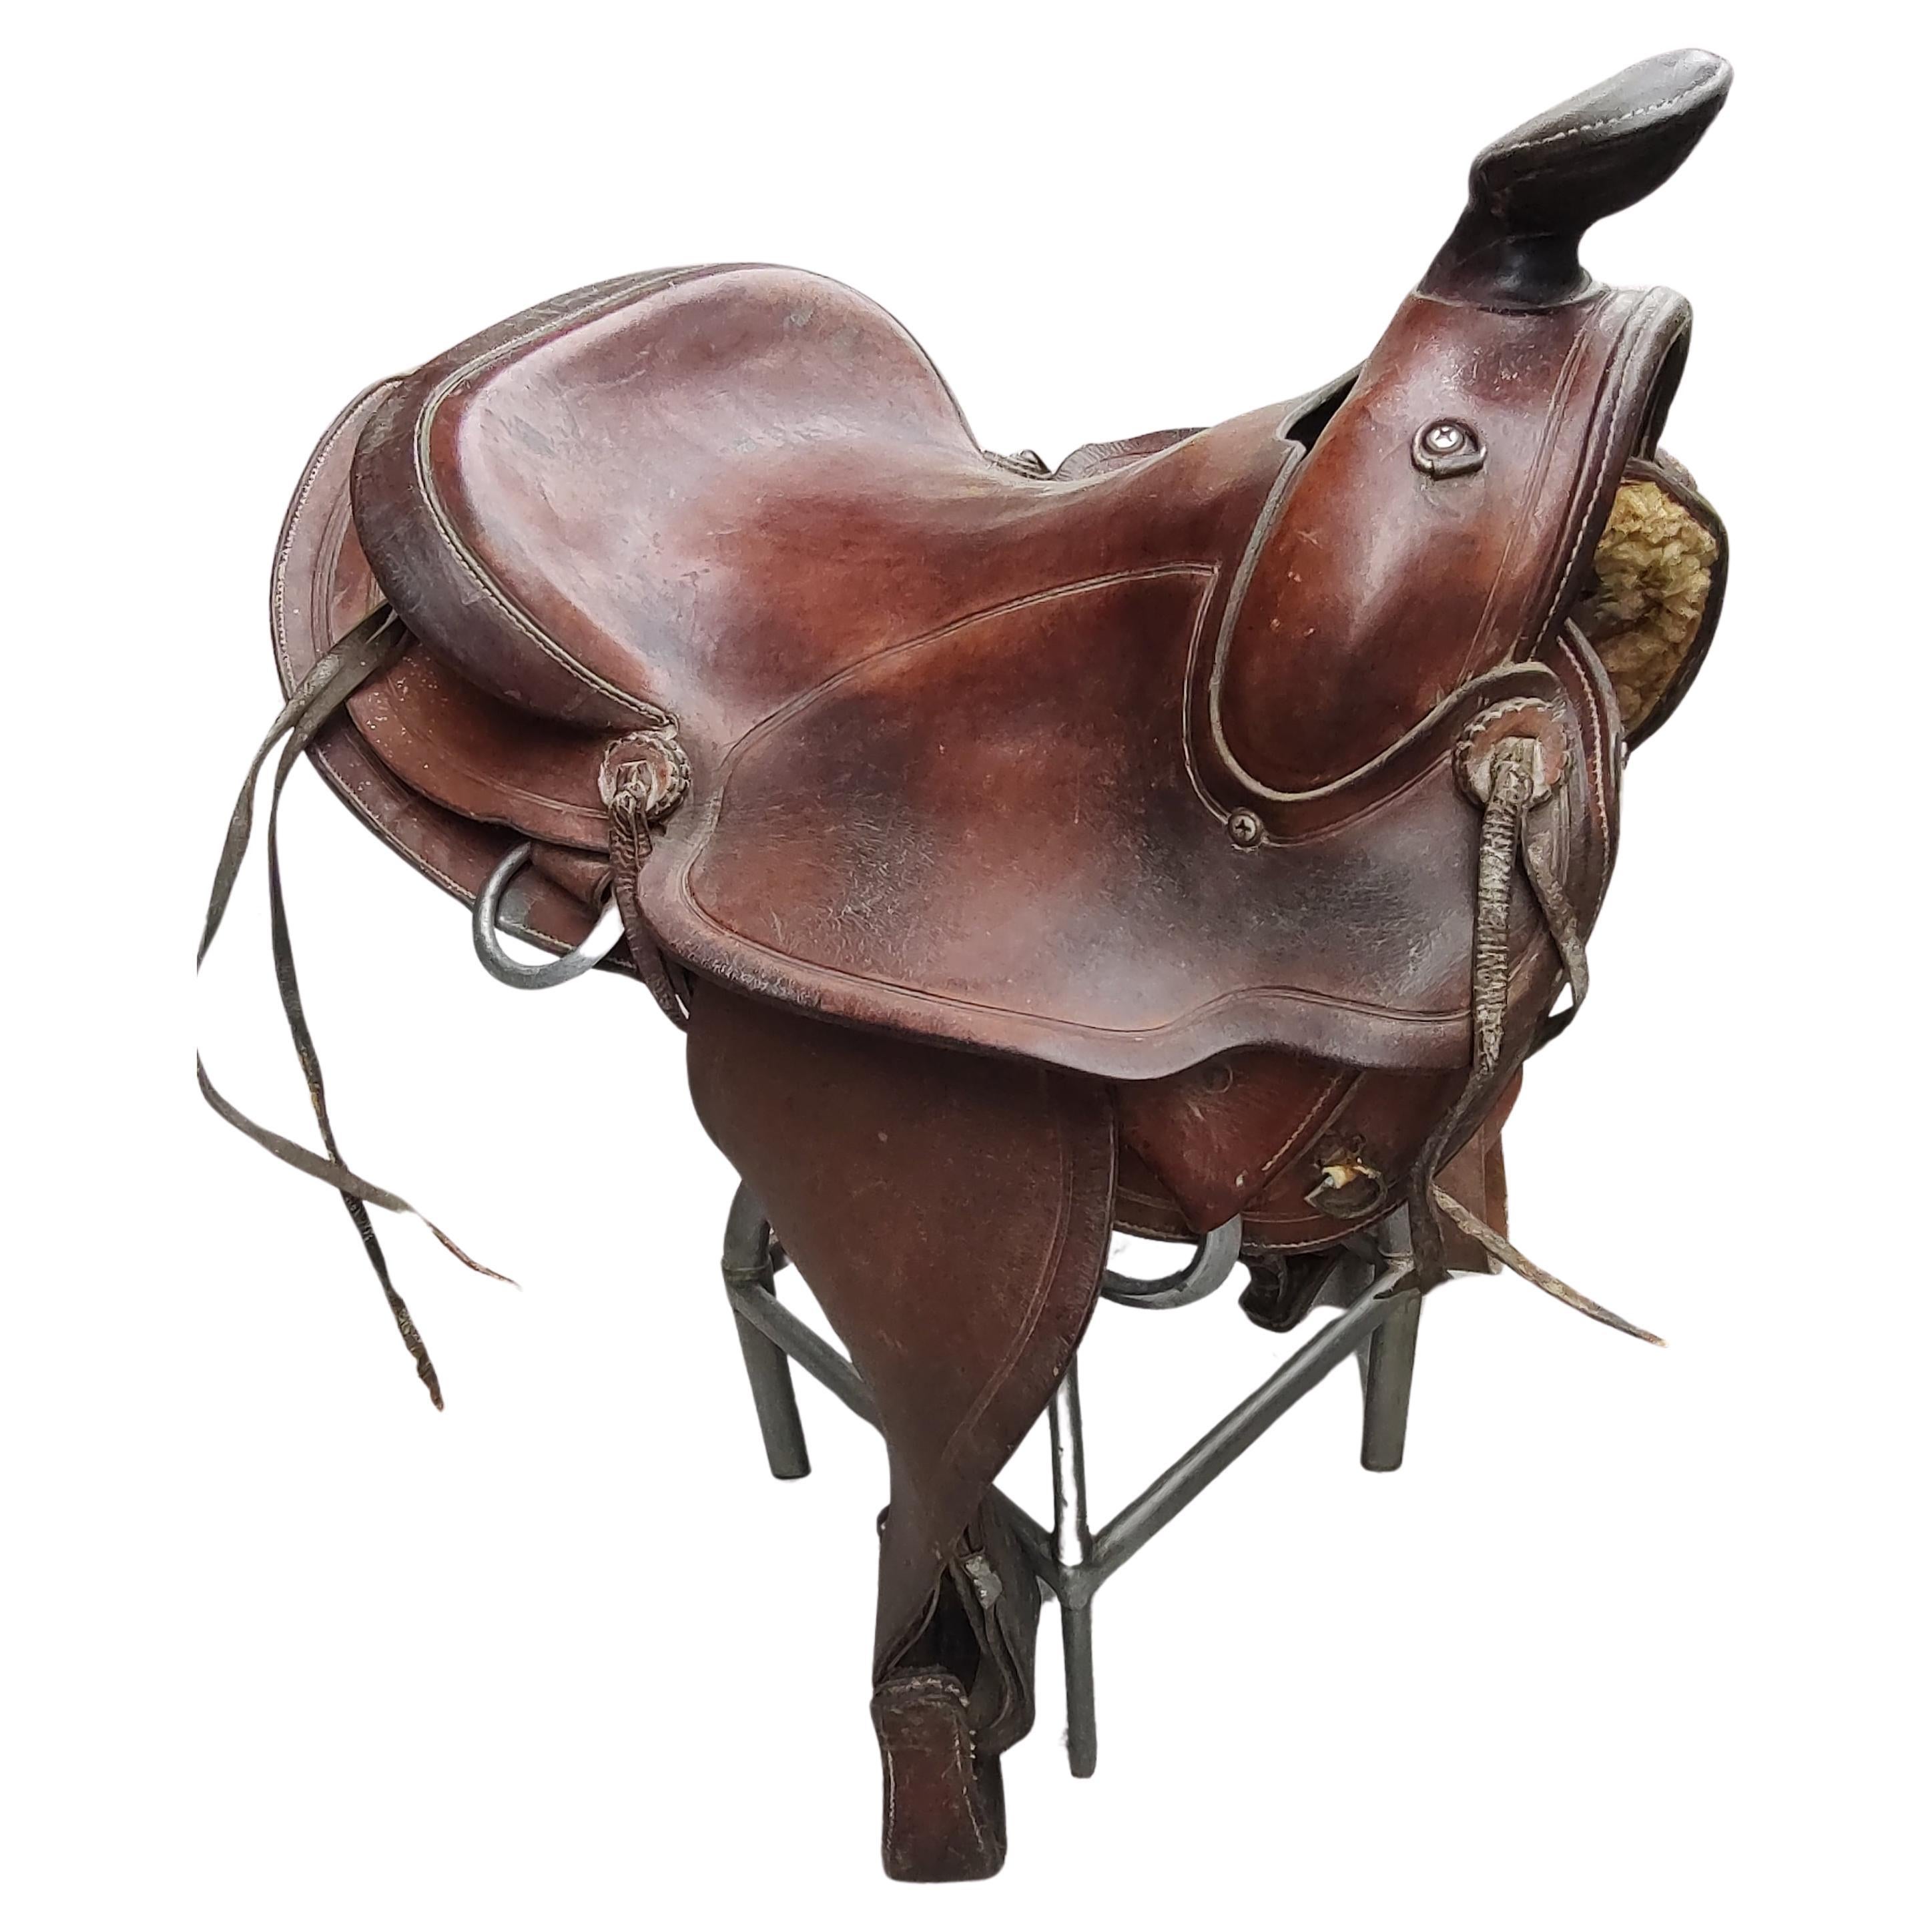 Real cowboy basic well made and used leather saddle. Stamped Simco. In excellent vintage condition with normal wear and tear, no damage and the leather is very good.